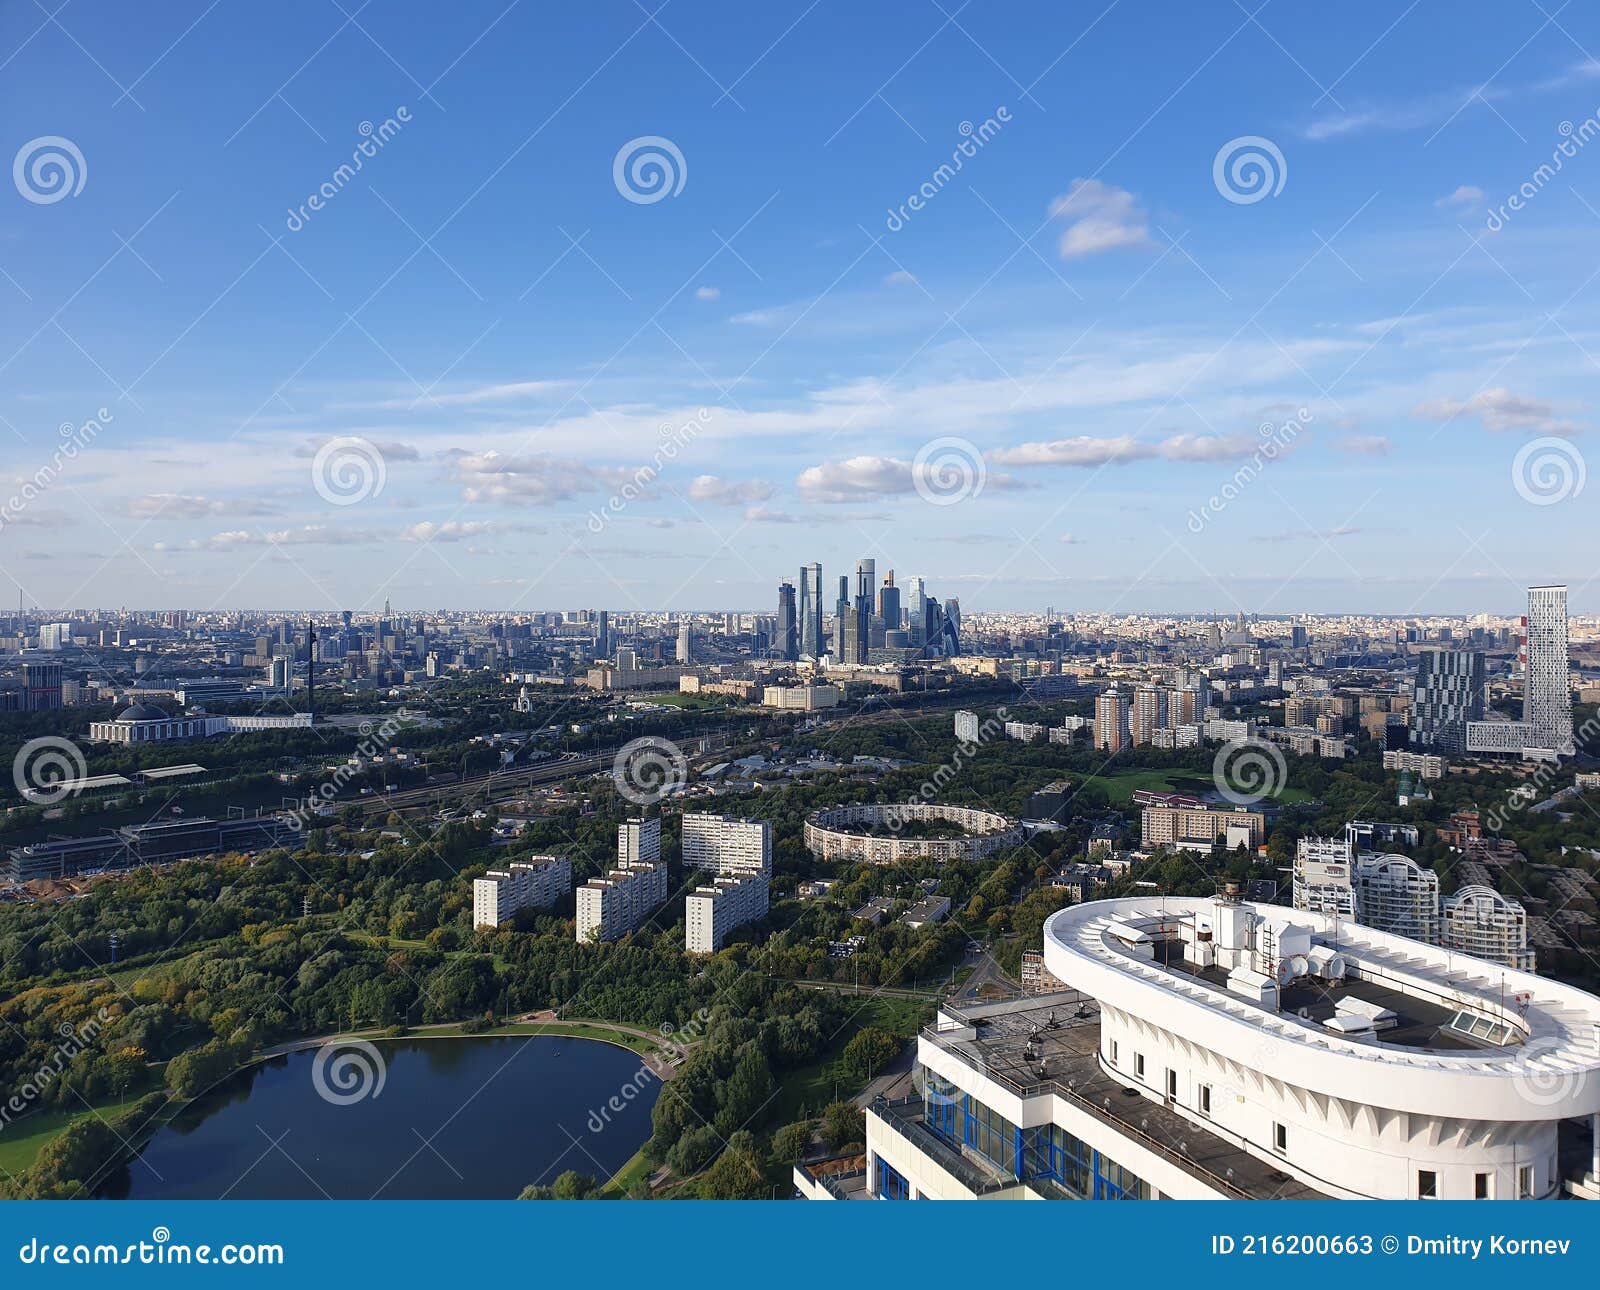 a moscow city wide overview from the skyscrappers` roof